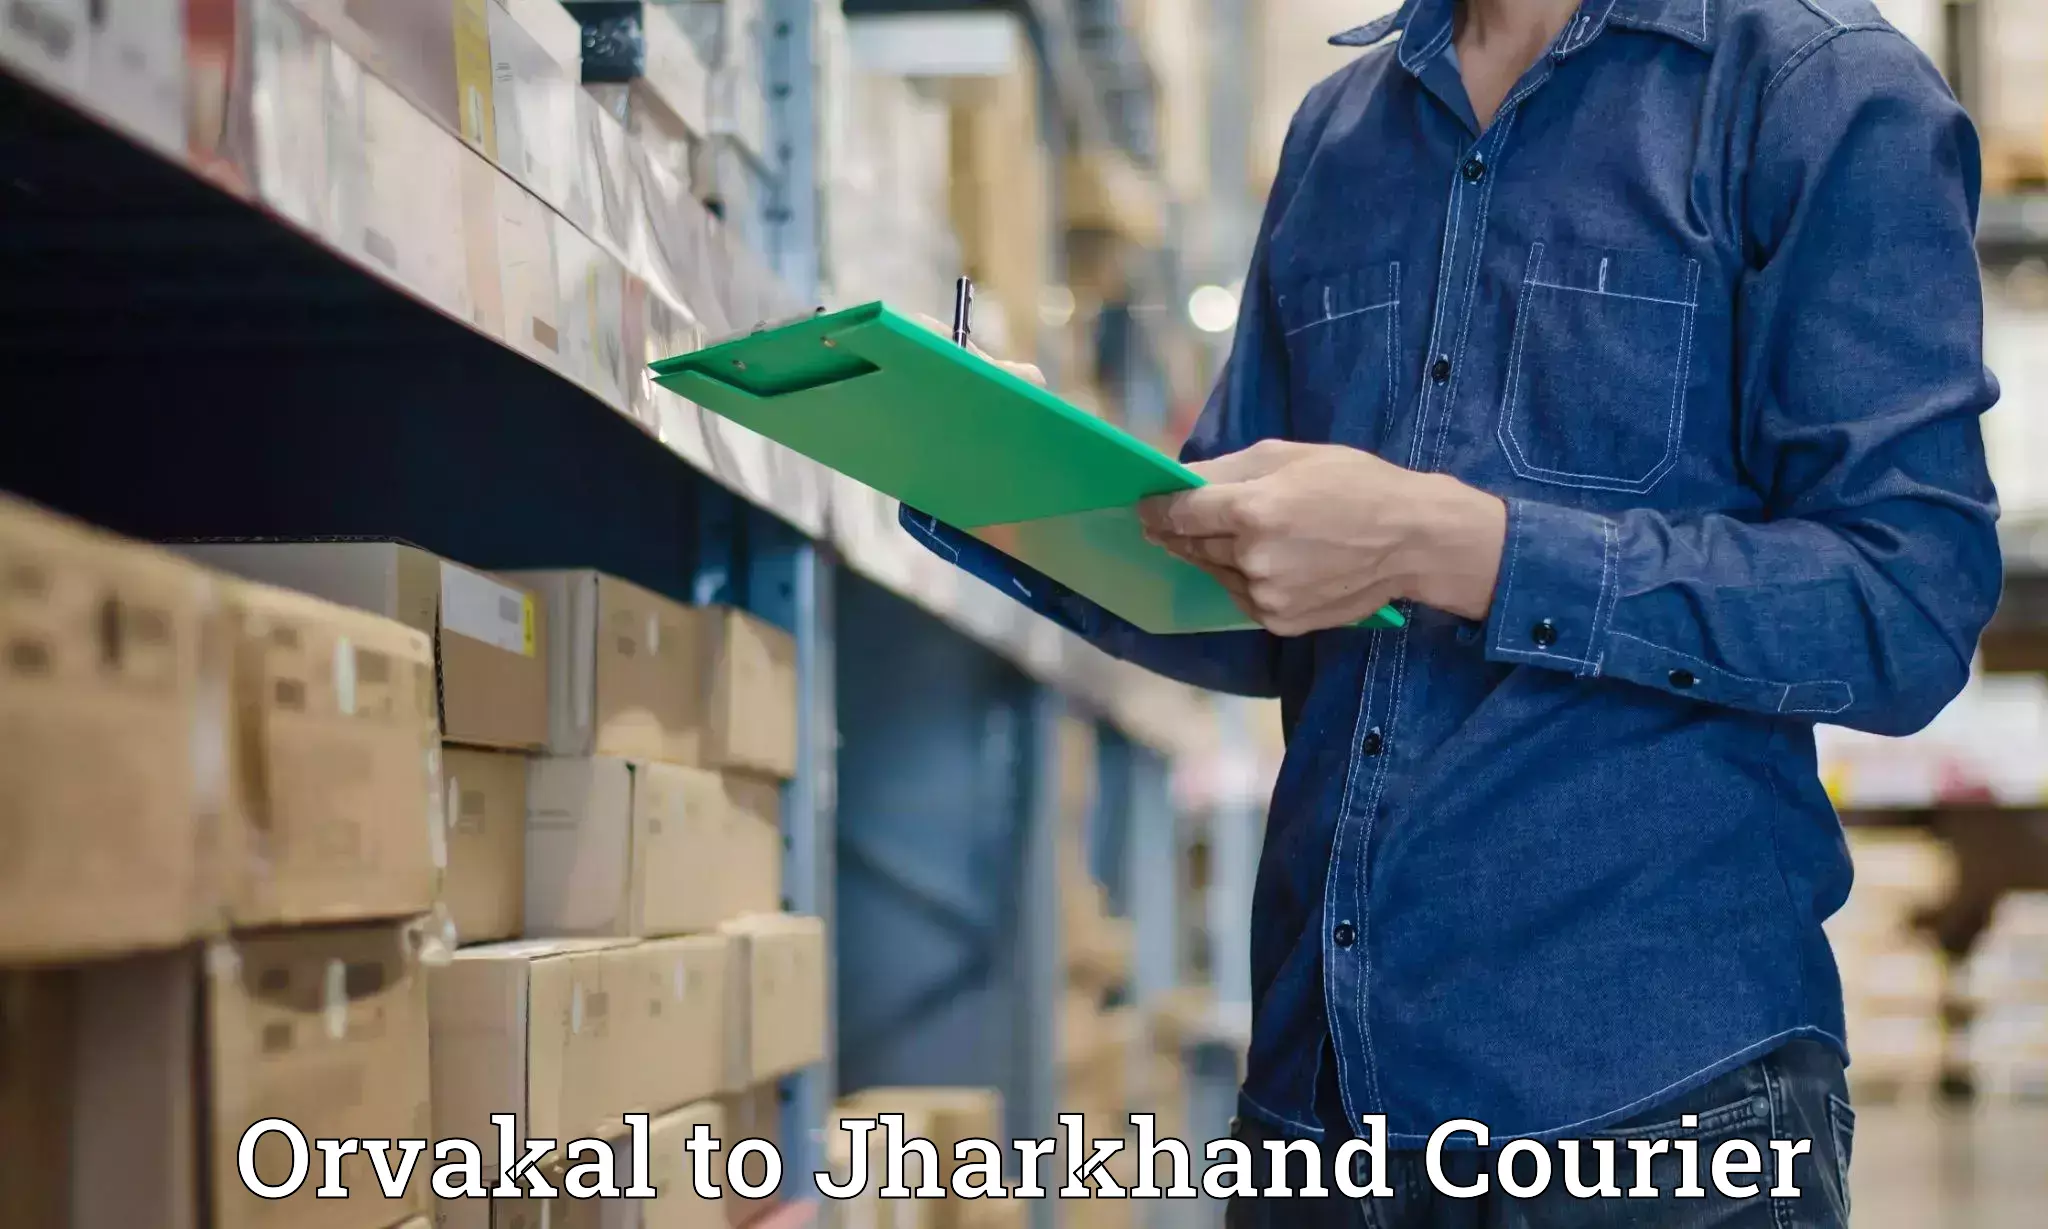 Efficient freight service in Orvakal to Jharkhand